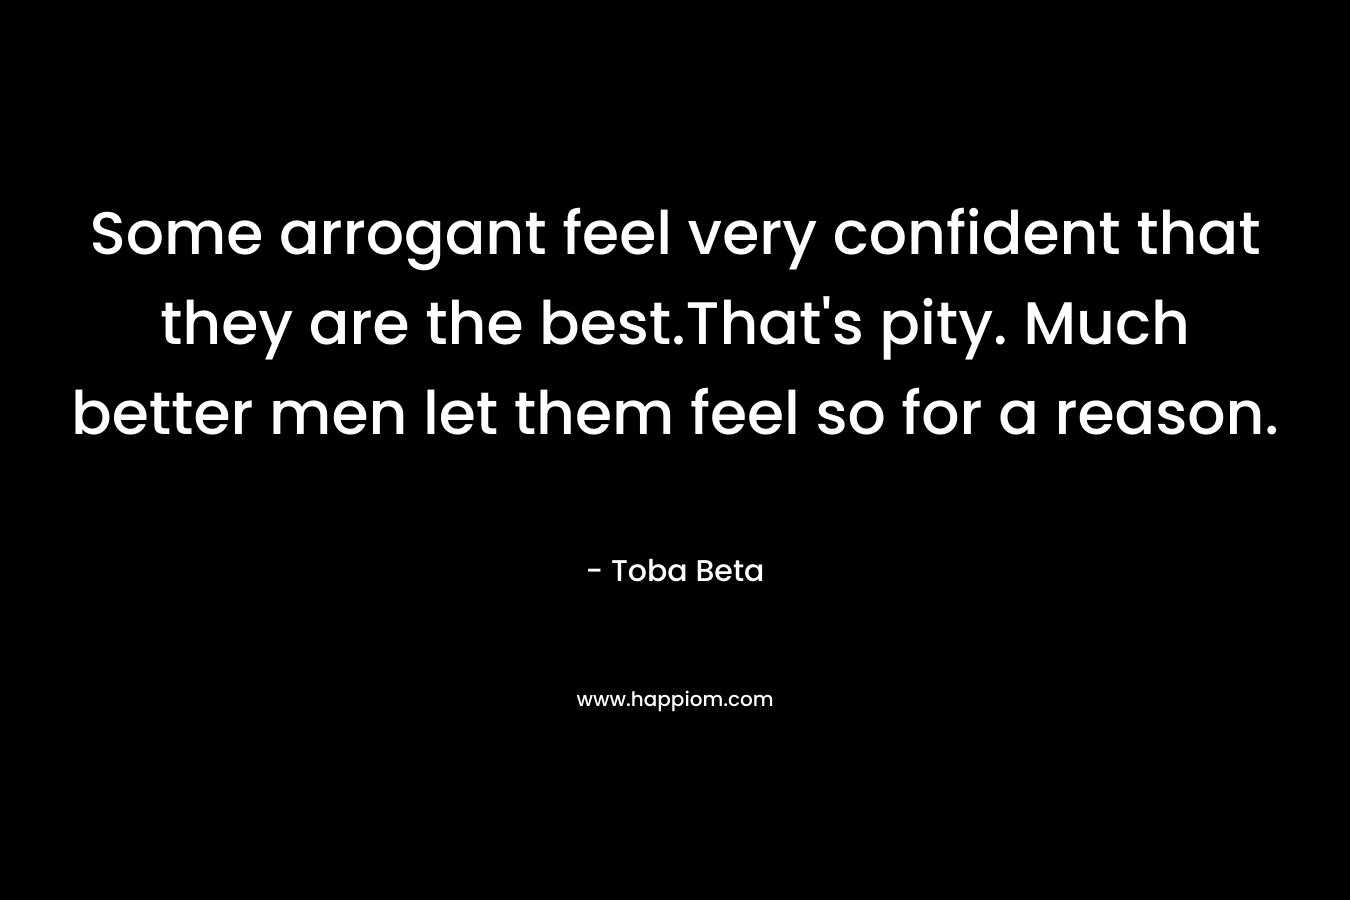 Some arrogant feel very confident that they are the best.That's pity. Much better men let them feel so for a reason.